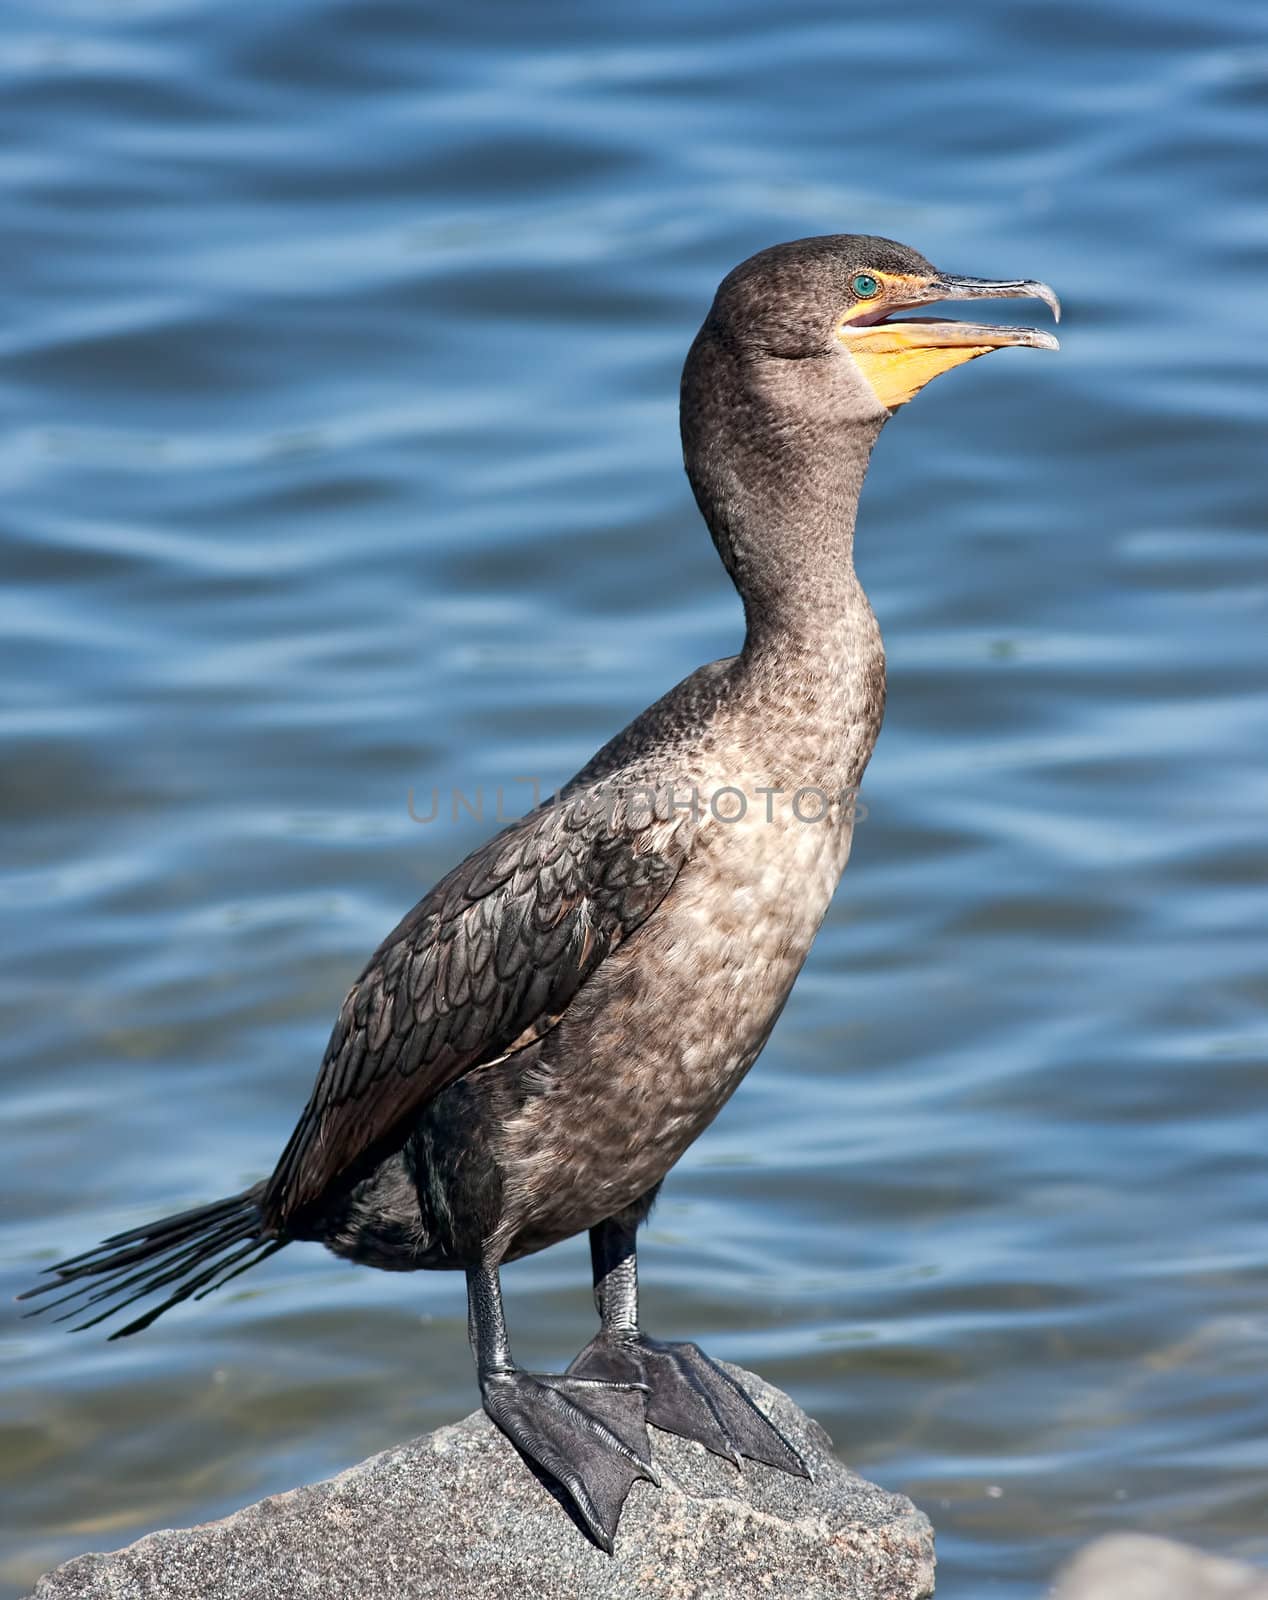 A Double-Crested Cormorant on a rock in a lake